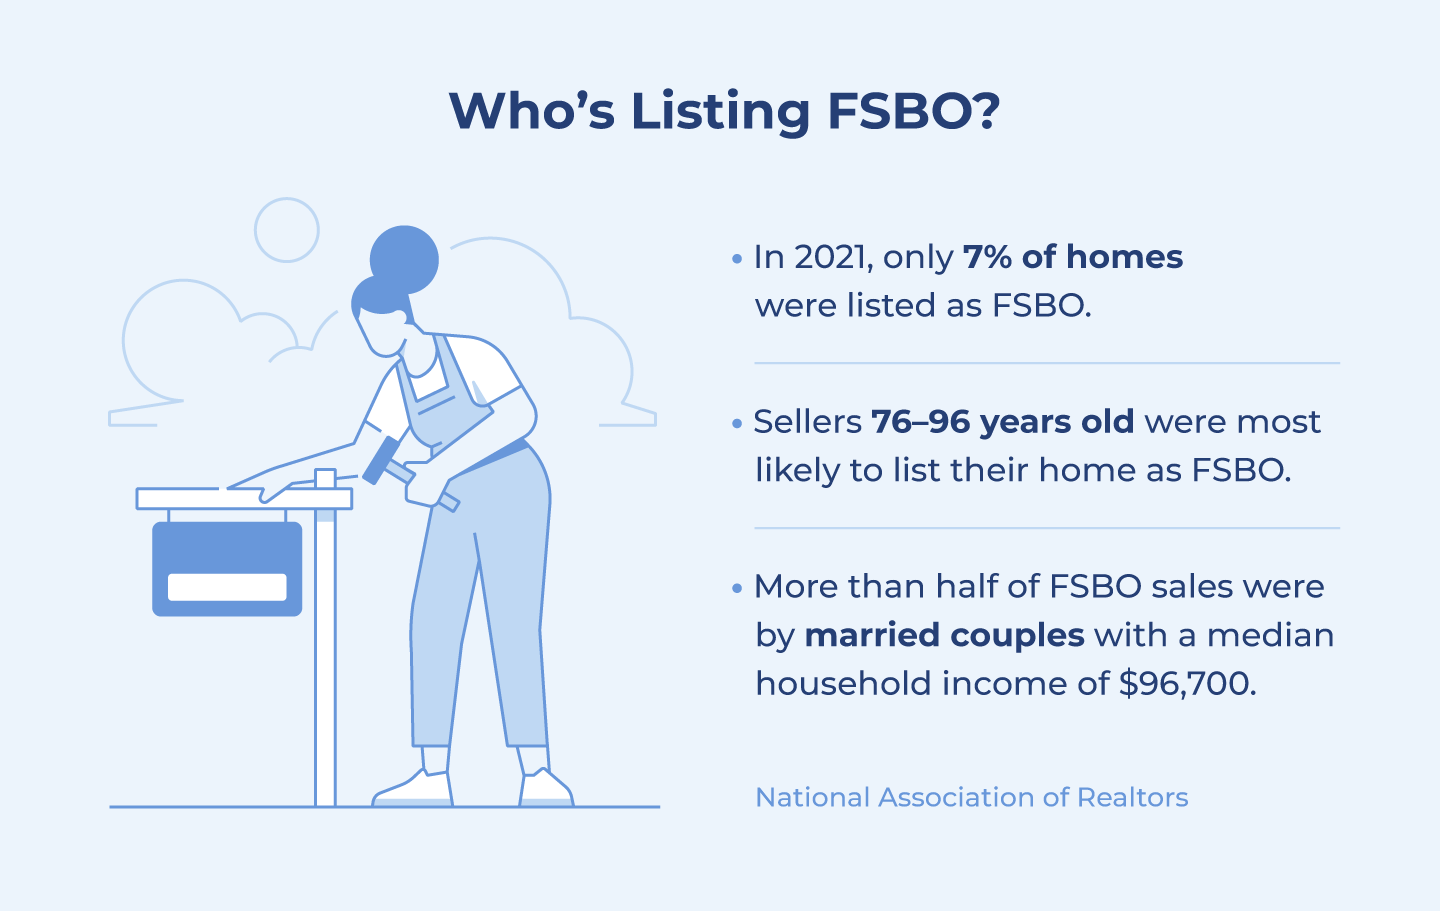 In 2021, only 7% of homes were listed as FSBO. Sellers 76–96 years old were most likely to use the FSBO method to sell their home. 64% of FSBO sales were by married couples with a median household income of $96,700.